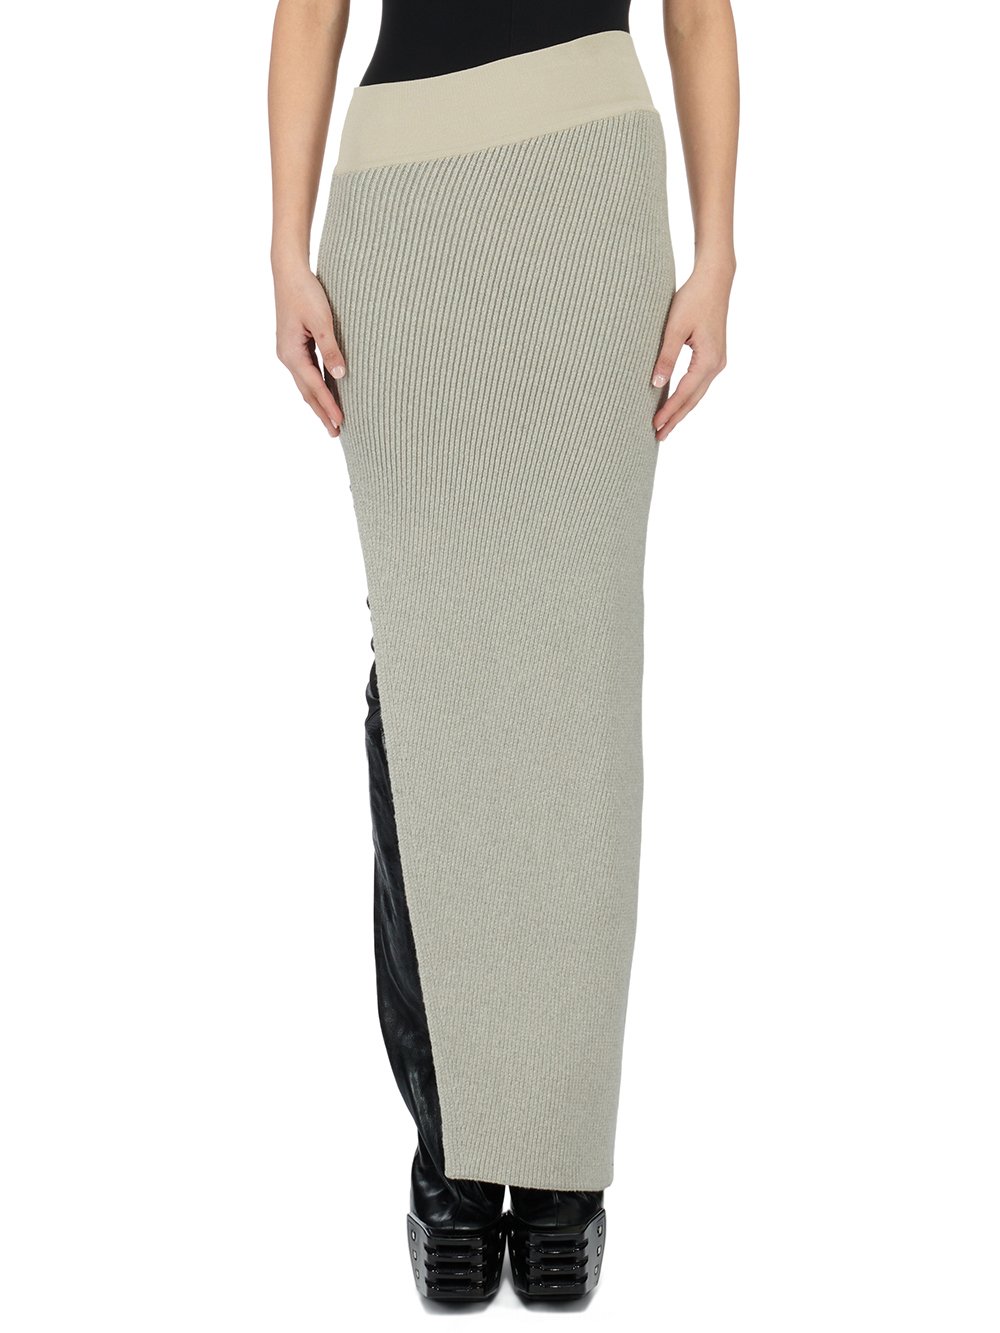 RICK OWENS FW23 RUNWAY LUXOR KNIT EDFU SKIRT ANKLE IN HEAVY RIB RECYCLED CASHMERE